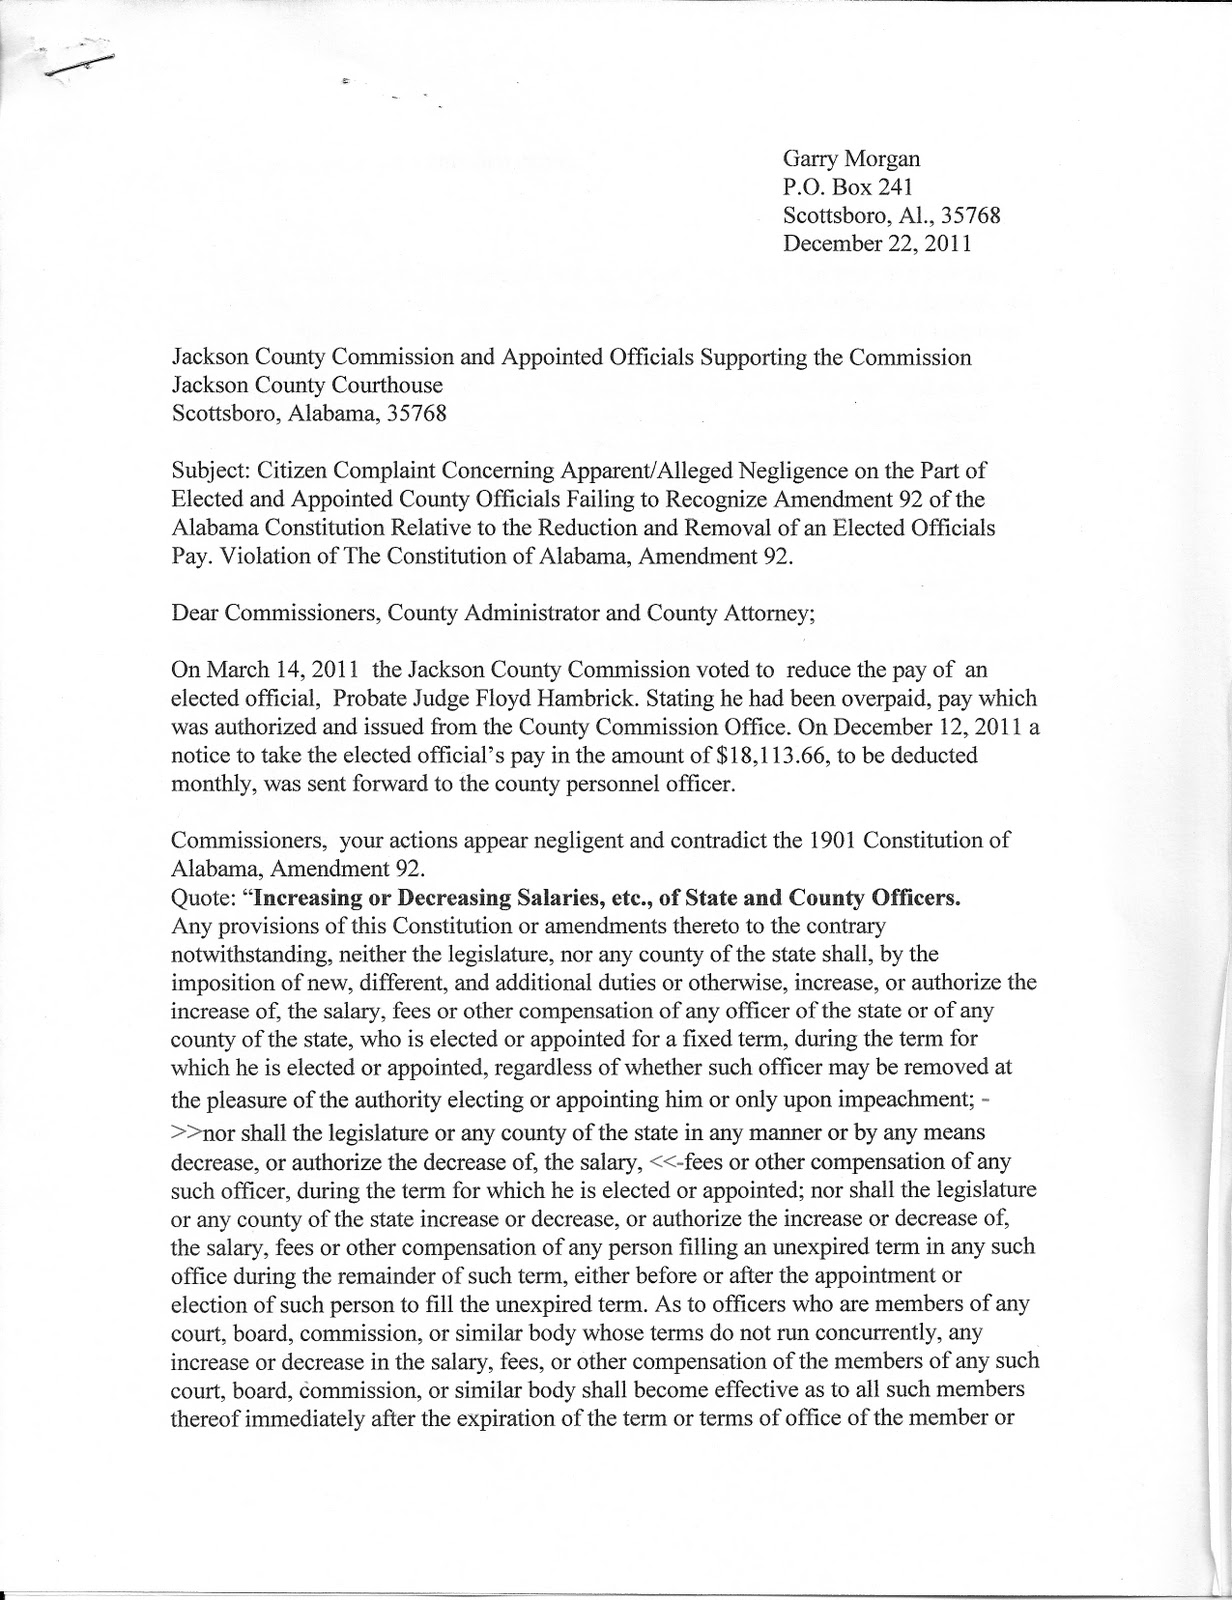 Sample Letter To Judge Requesting Leniency from 2.bp.blogspot.com